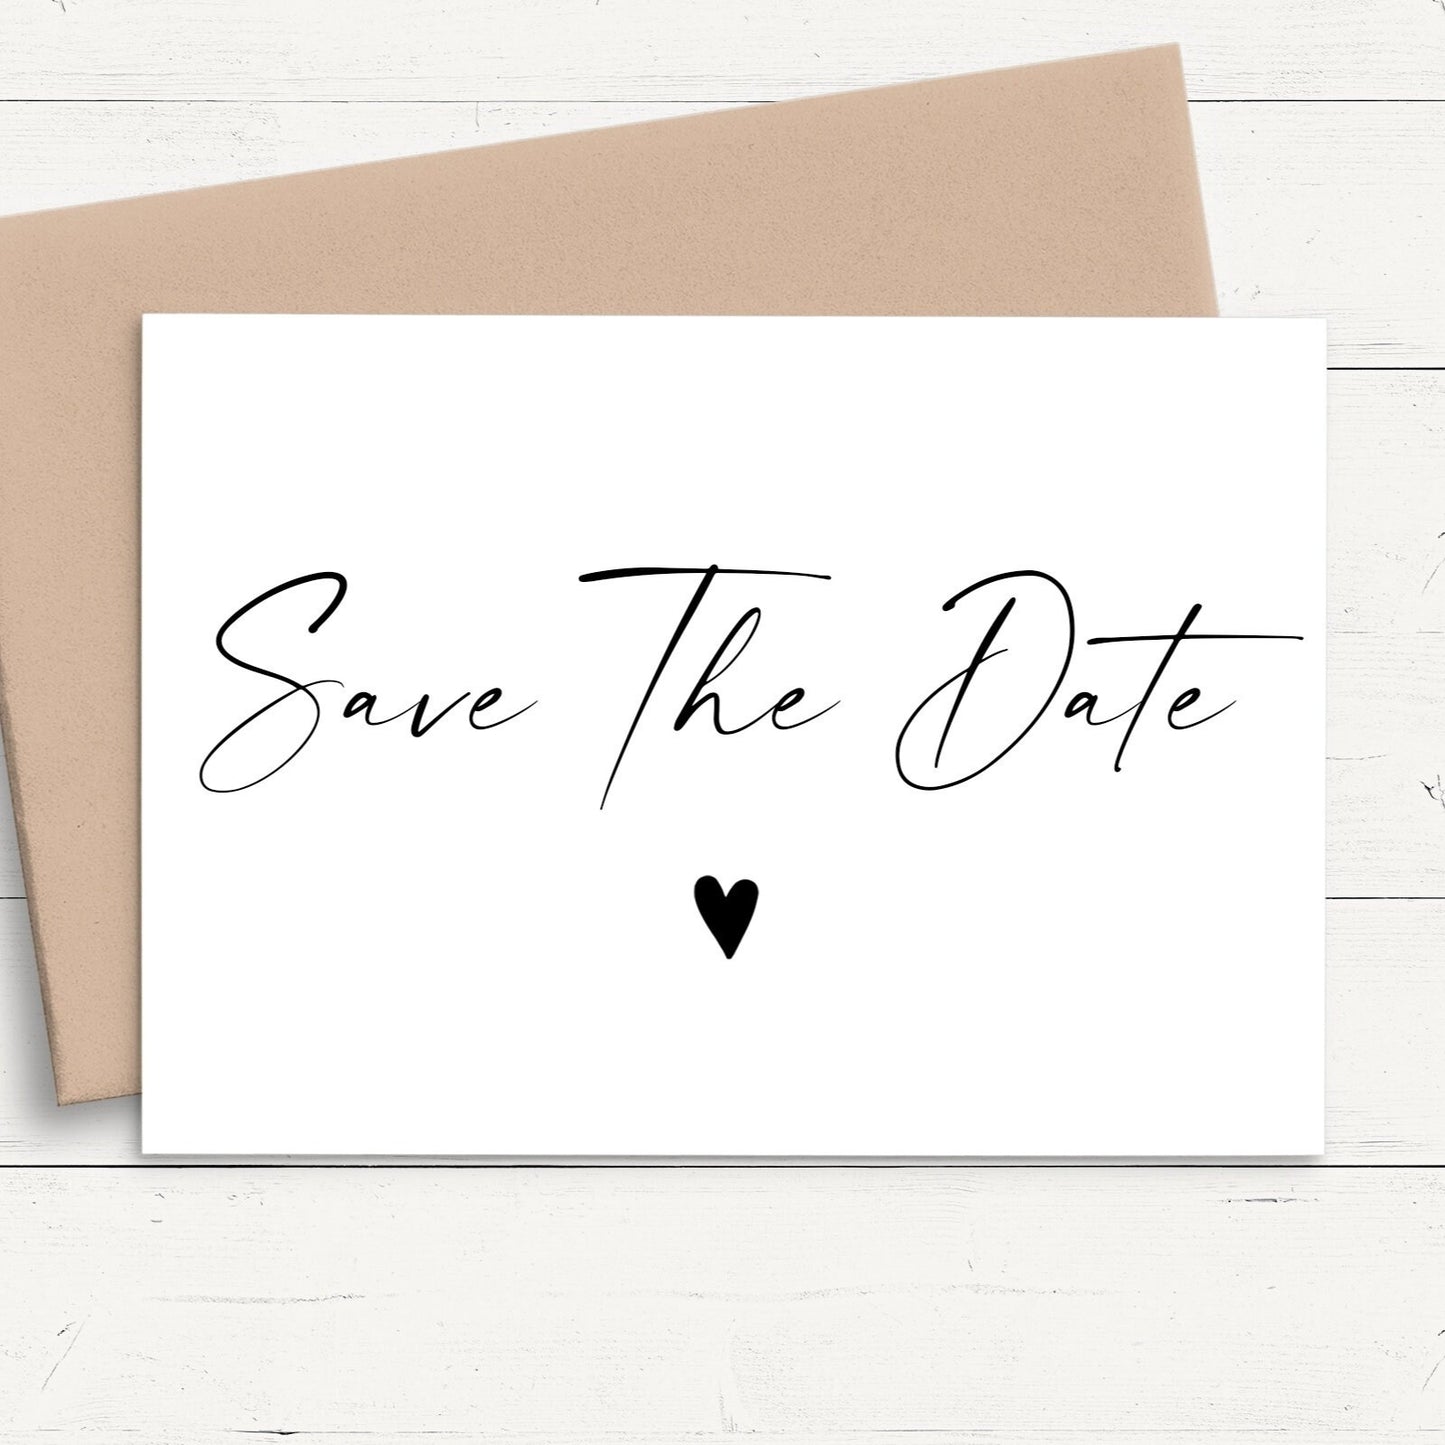 save the date pregnancy announcement cards multipack family personalised matte white cardstock kraft brown envelope